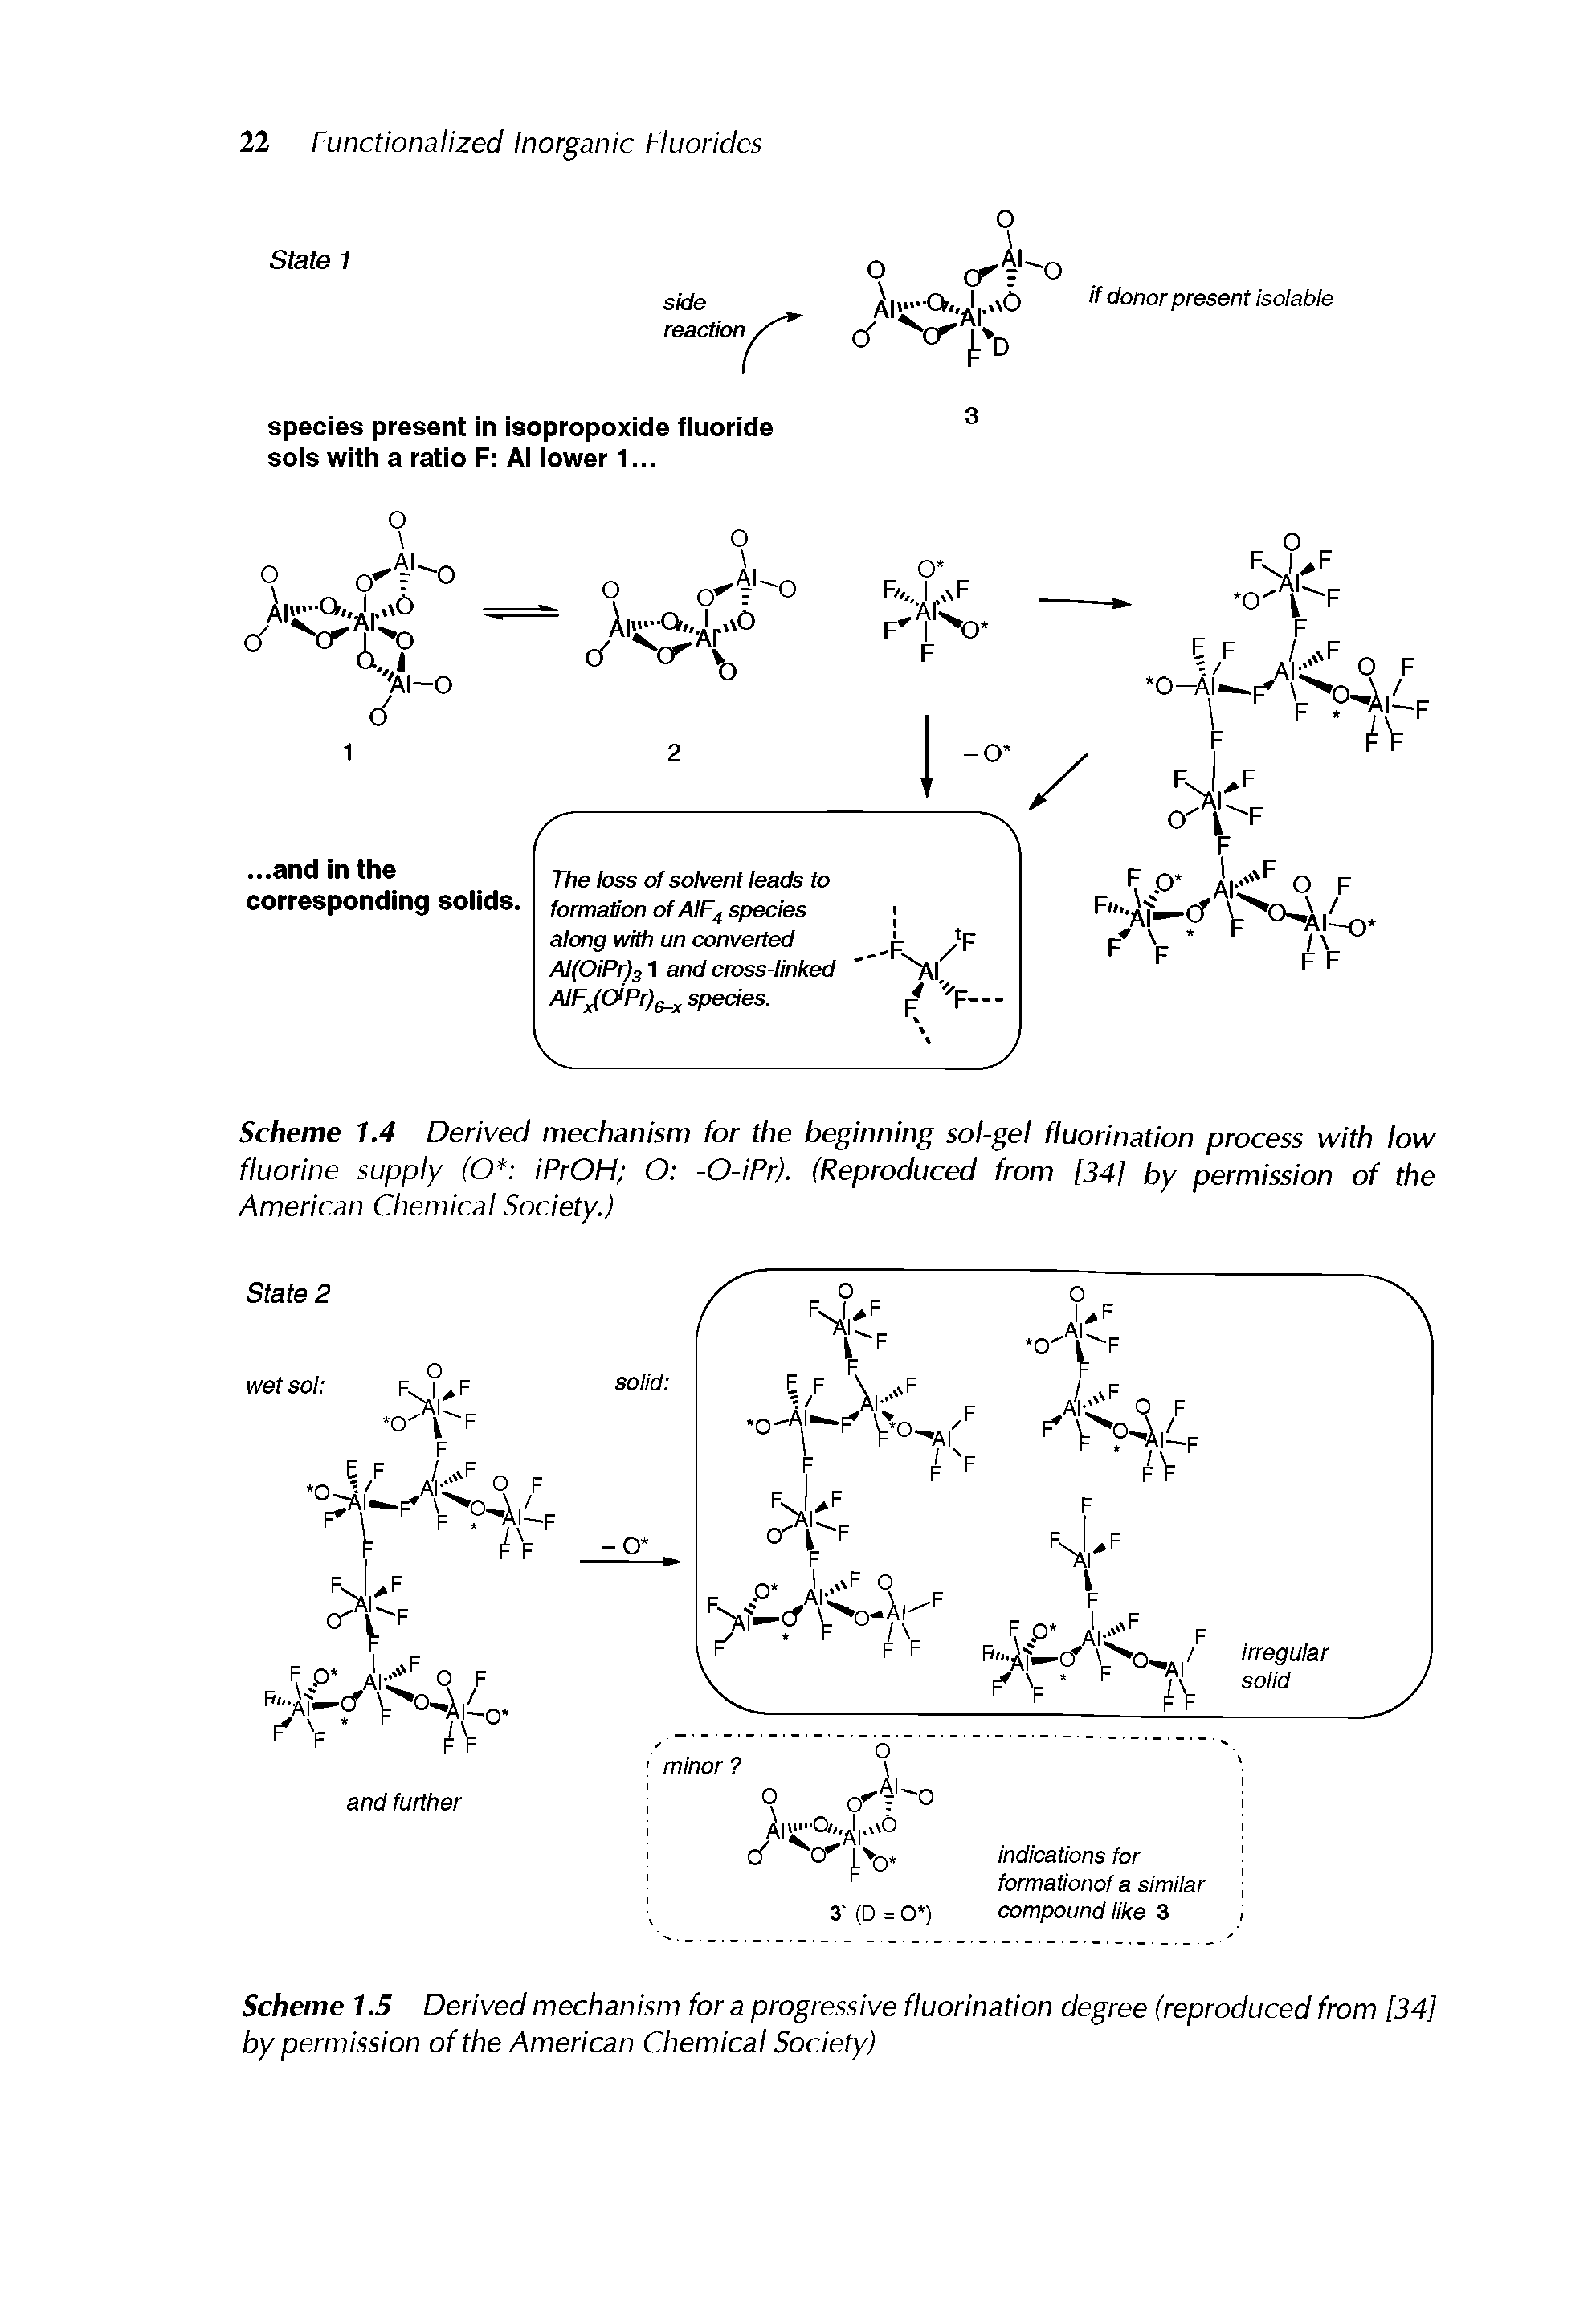 Scheme 1.5 Derived mechanism for a progressive fluorination degree (reproduced from [34] by permission of the American Chemical Society)...